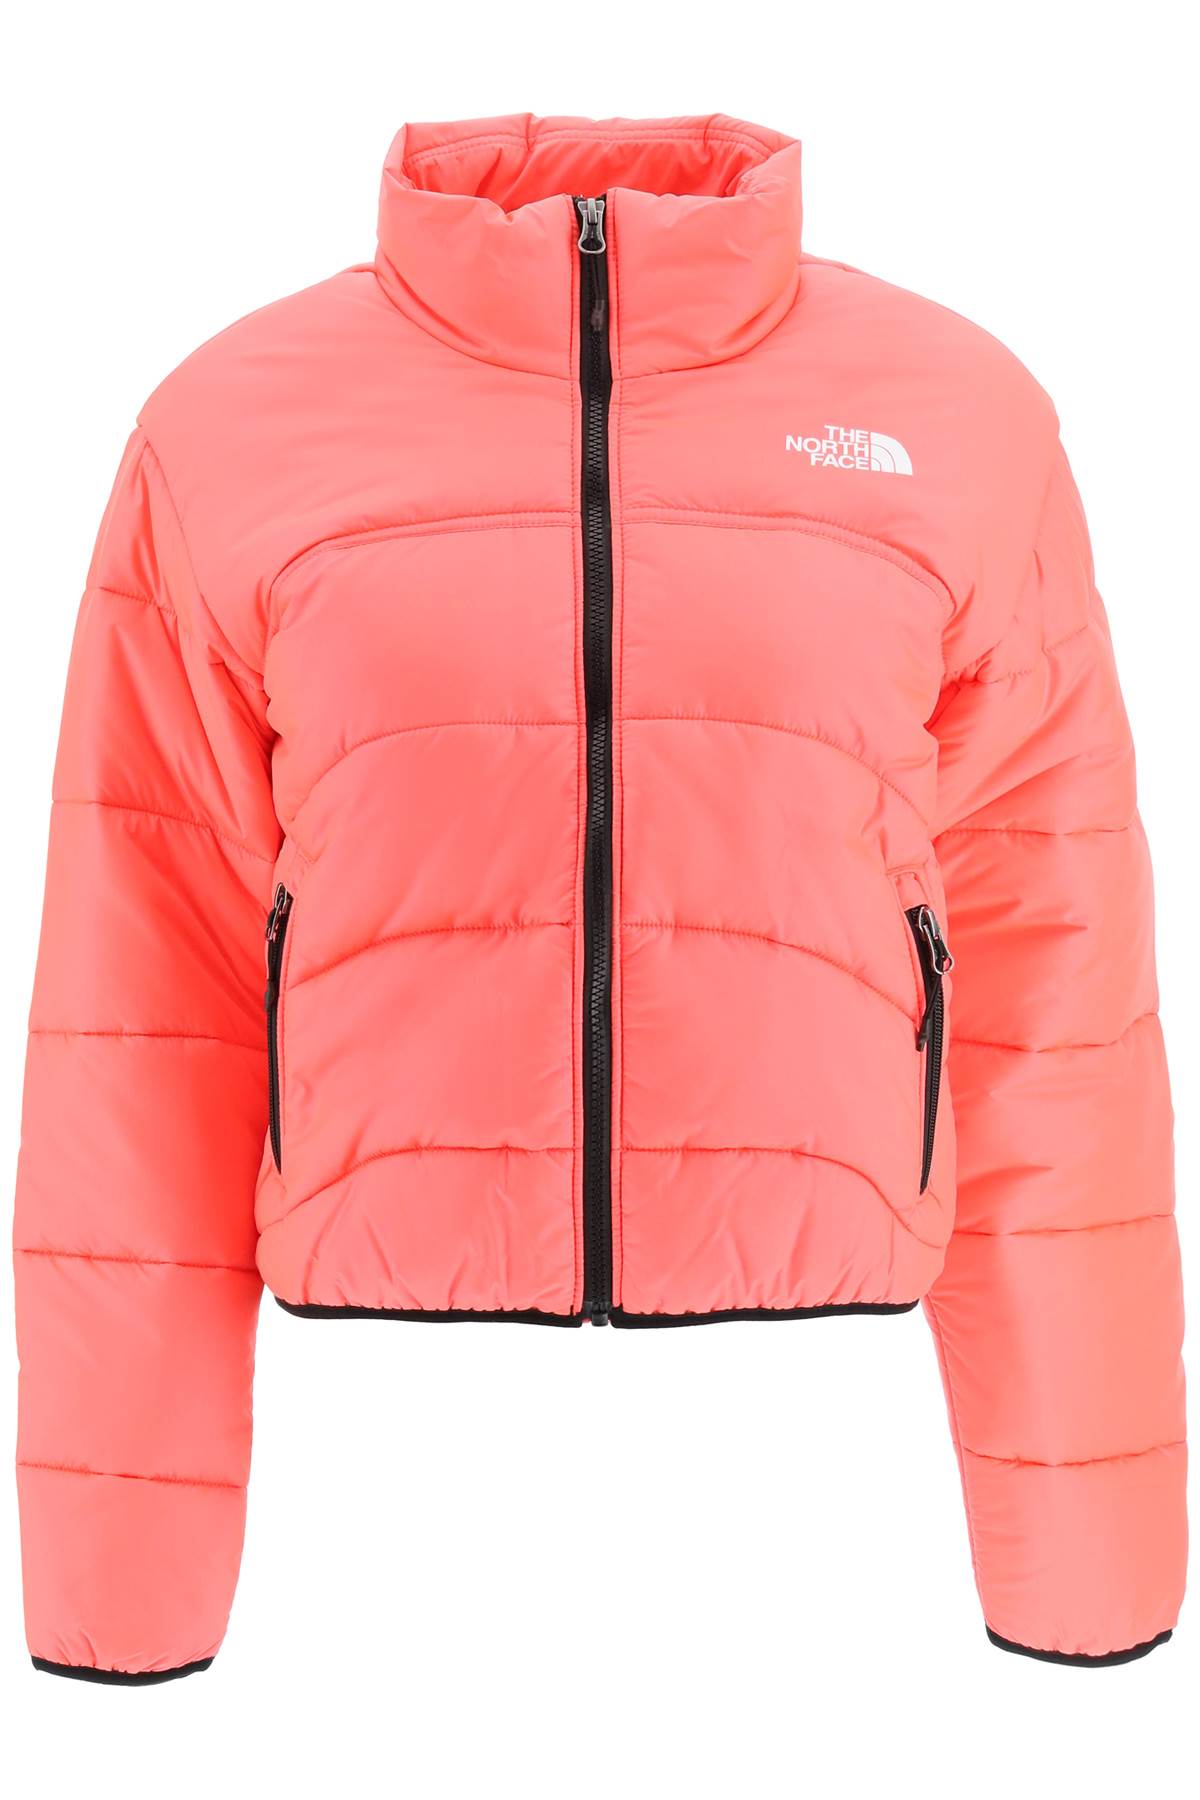 THE NORTH FACE ELEMENTS SHORT JACKET 